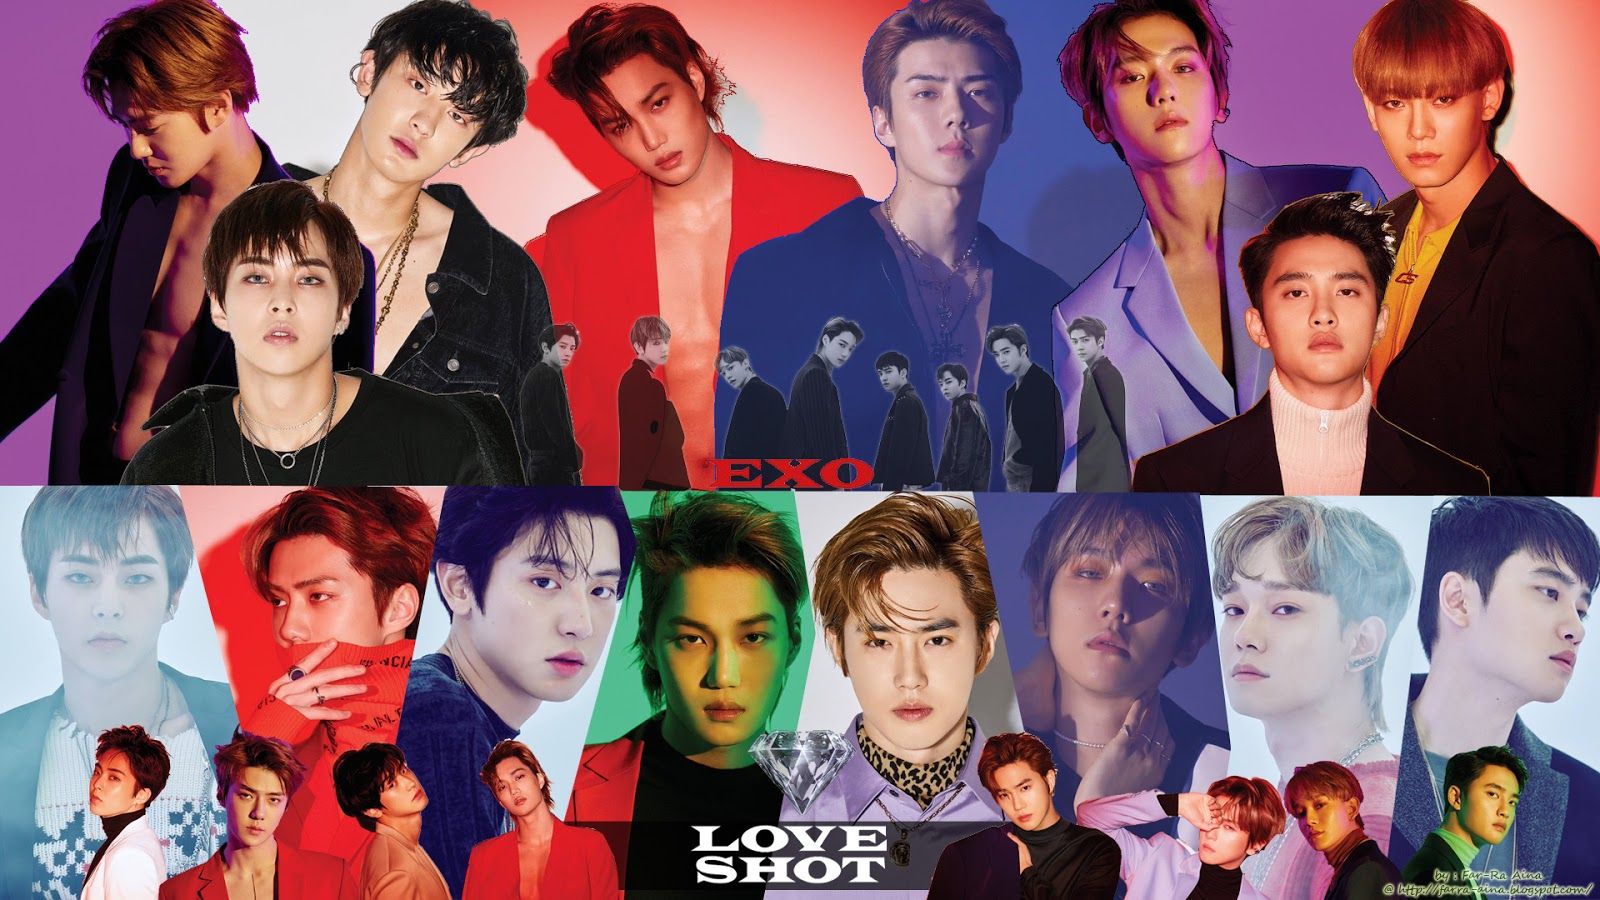 A collage of EXO members with the center image being the 'Love Shot' album cover - EXO